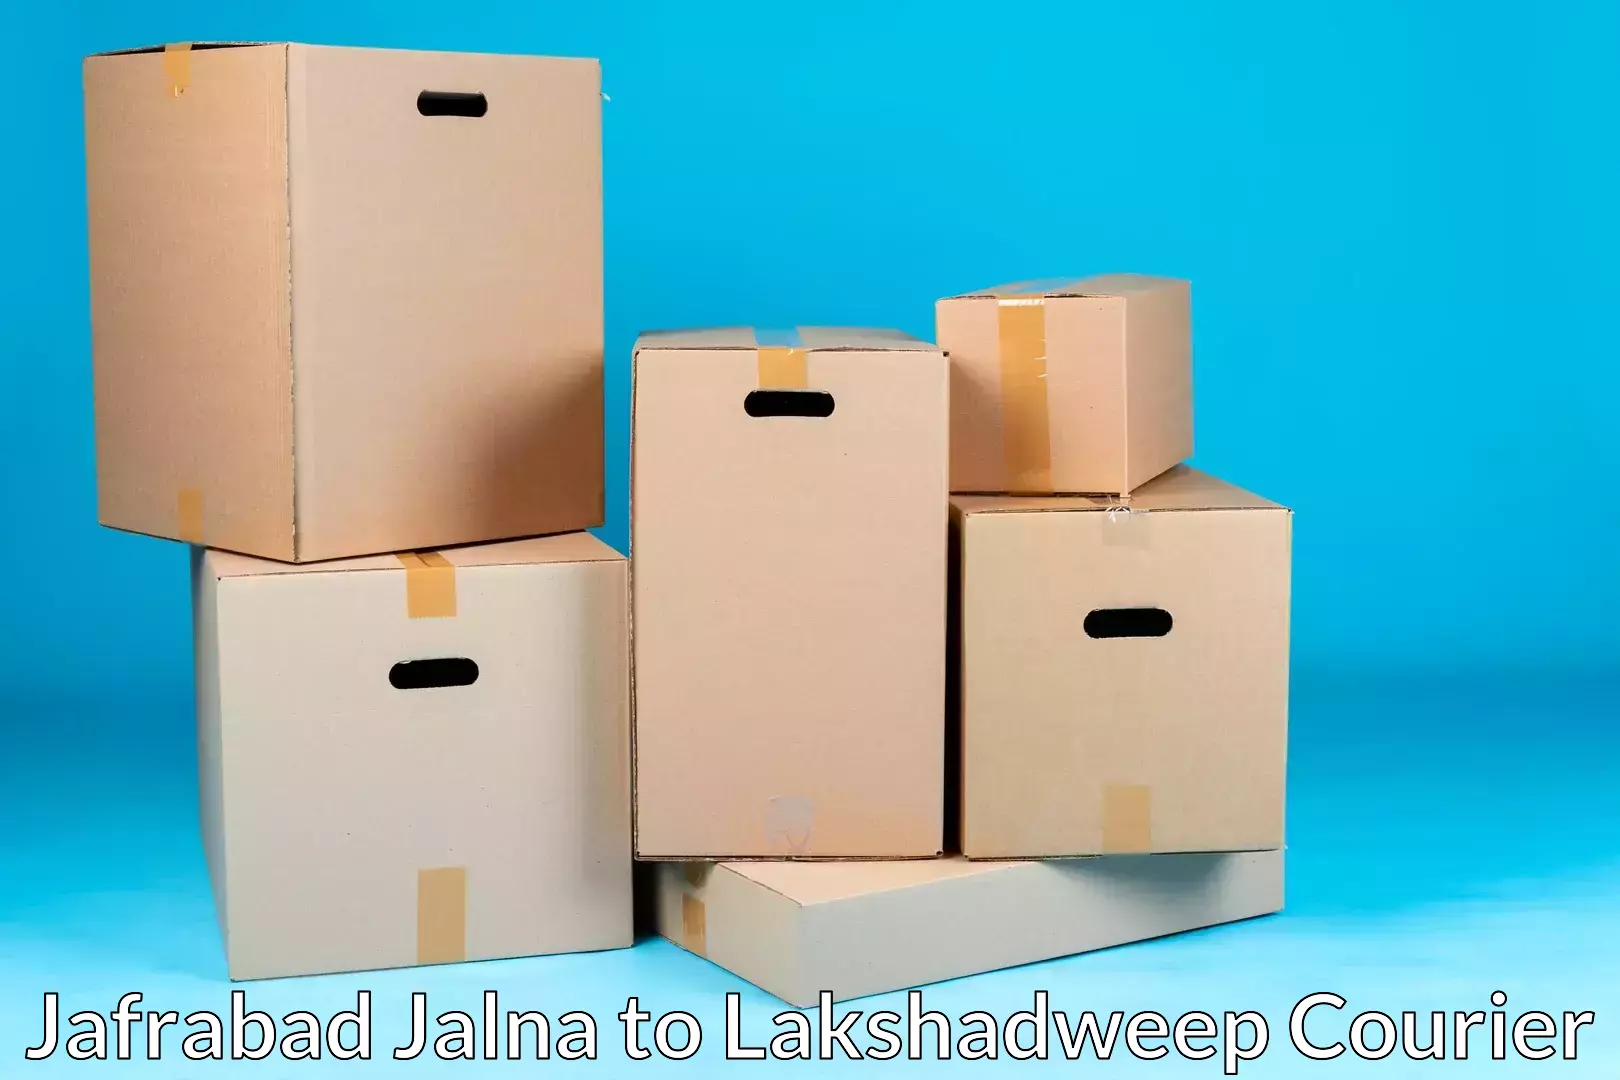 Furniture delivery service in Jafrabad Jalna to Lakshadweep